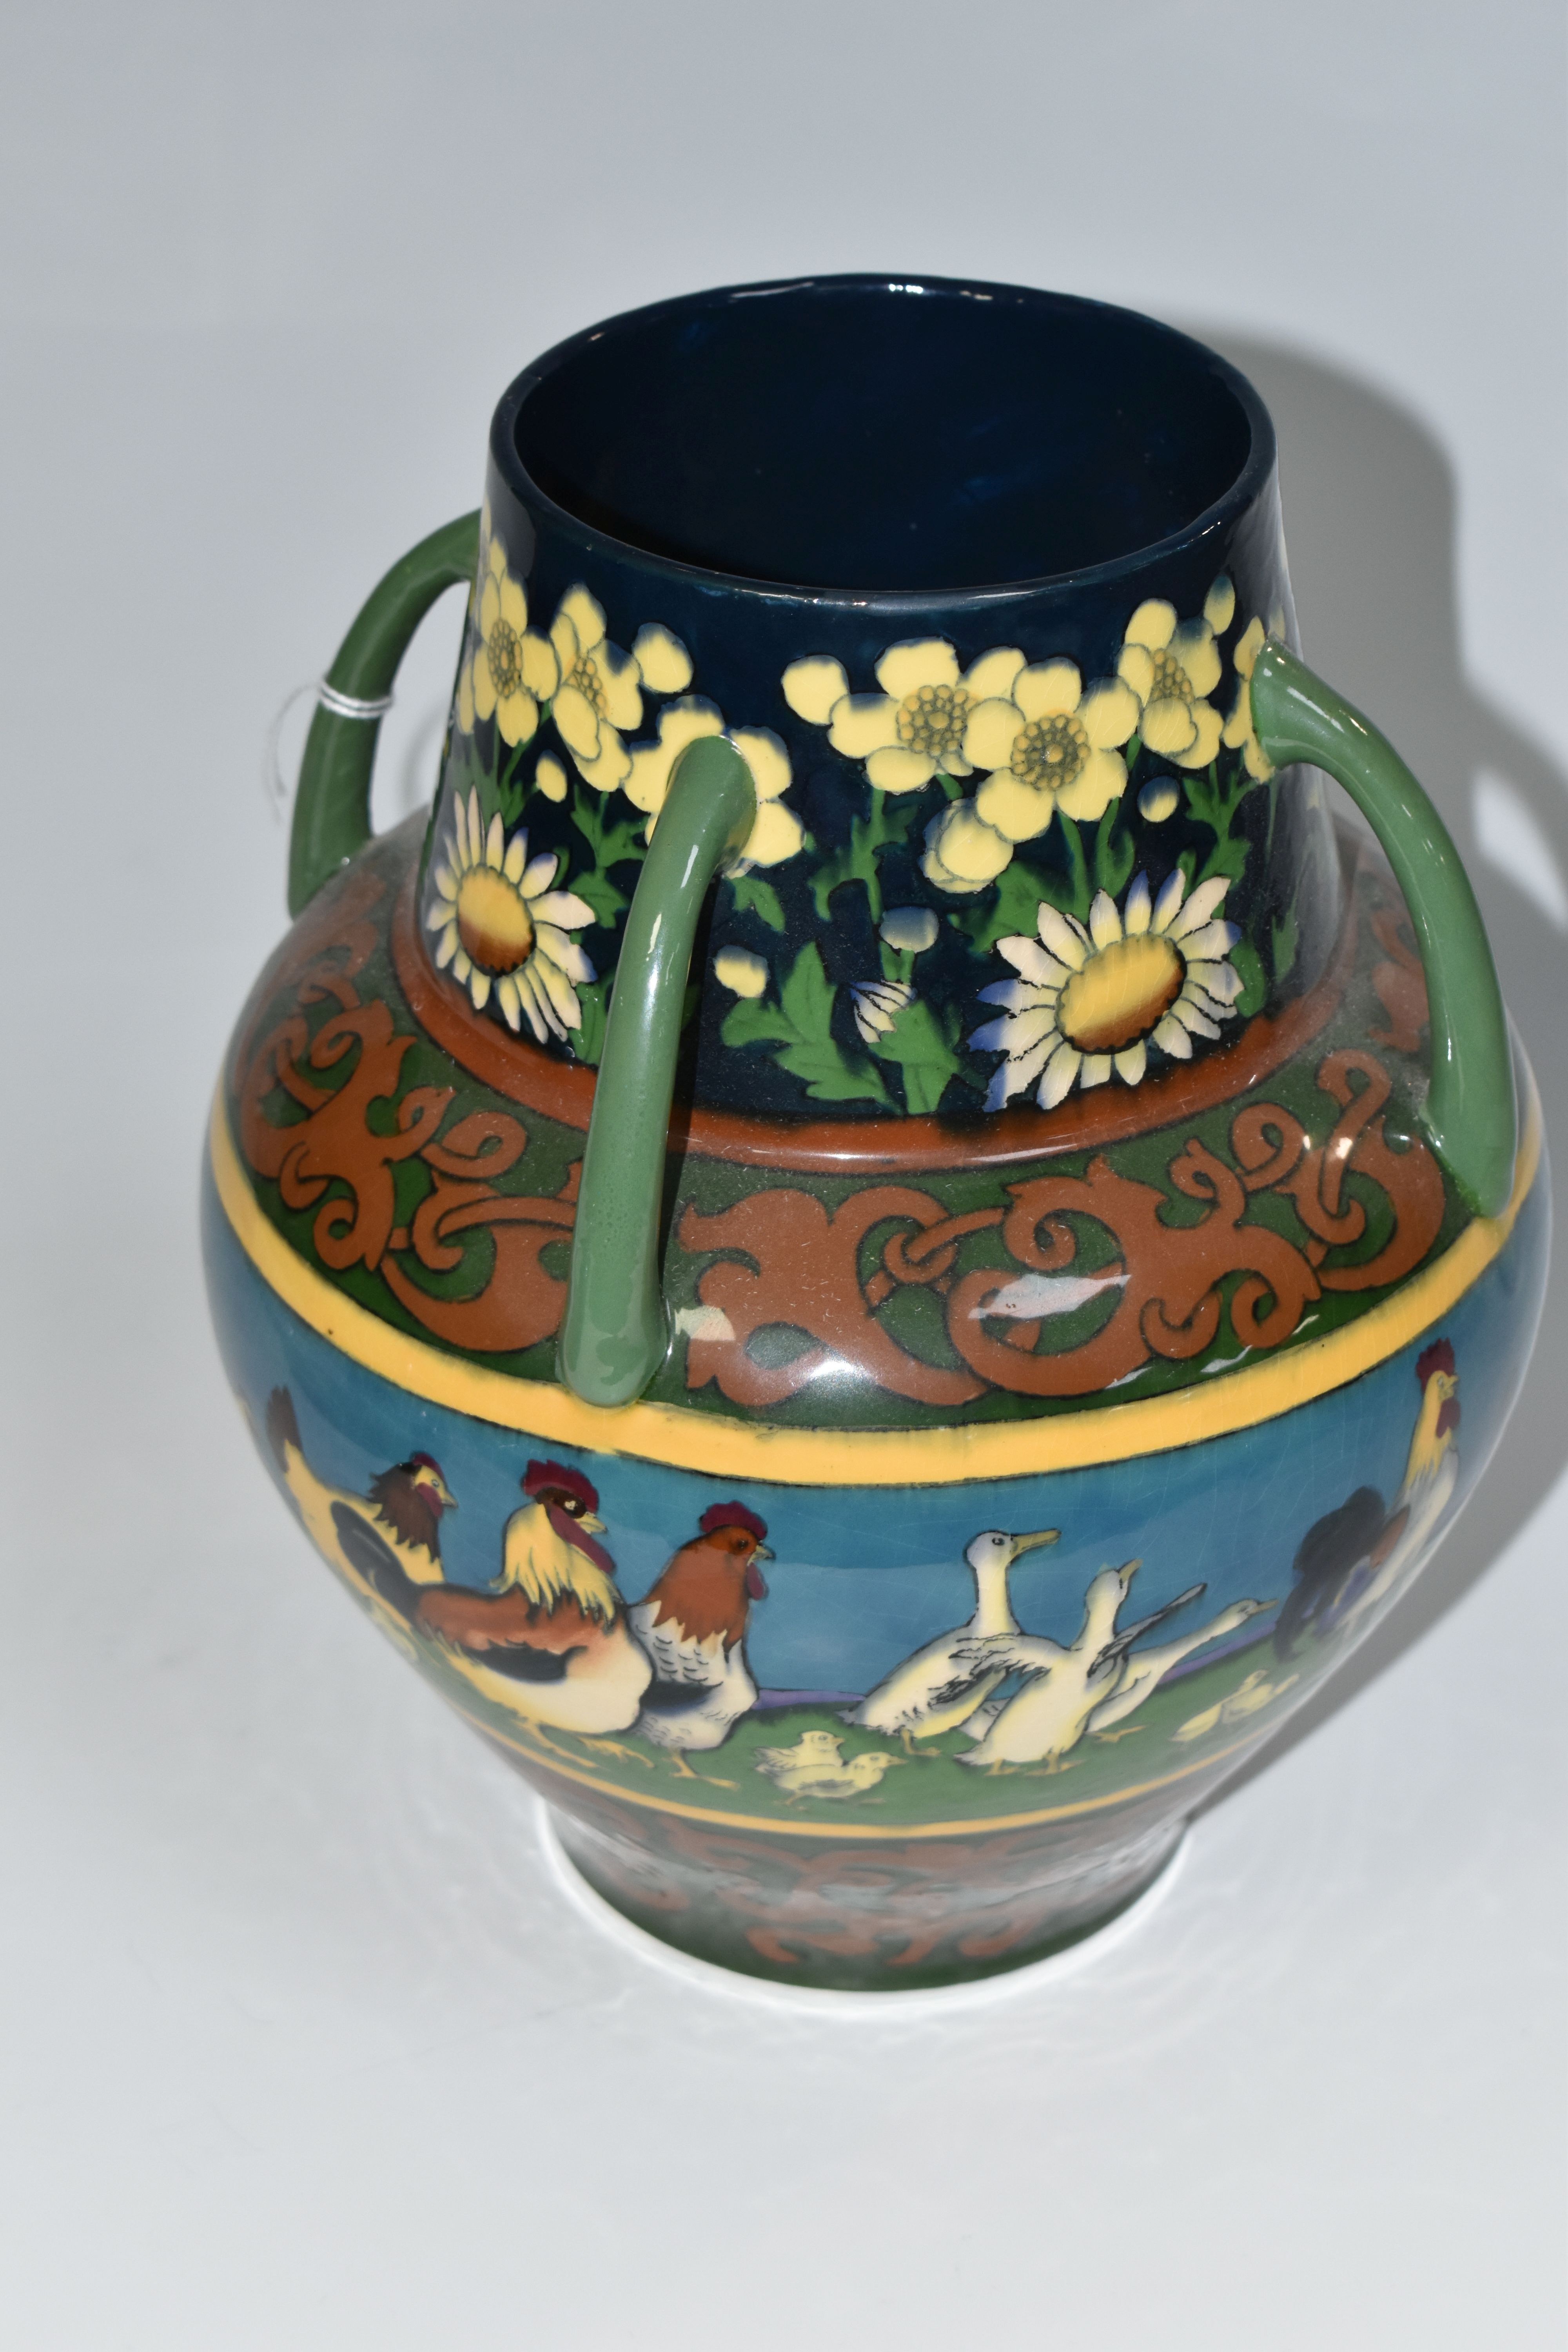 A WILEMAN & CO FOLEY INTARSIO 'POULTRY' PATTERN FOUR HANDLED VASE, model 3279, decorated with a band - Image 4 of 6